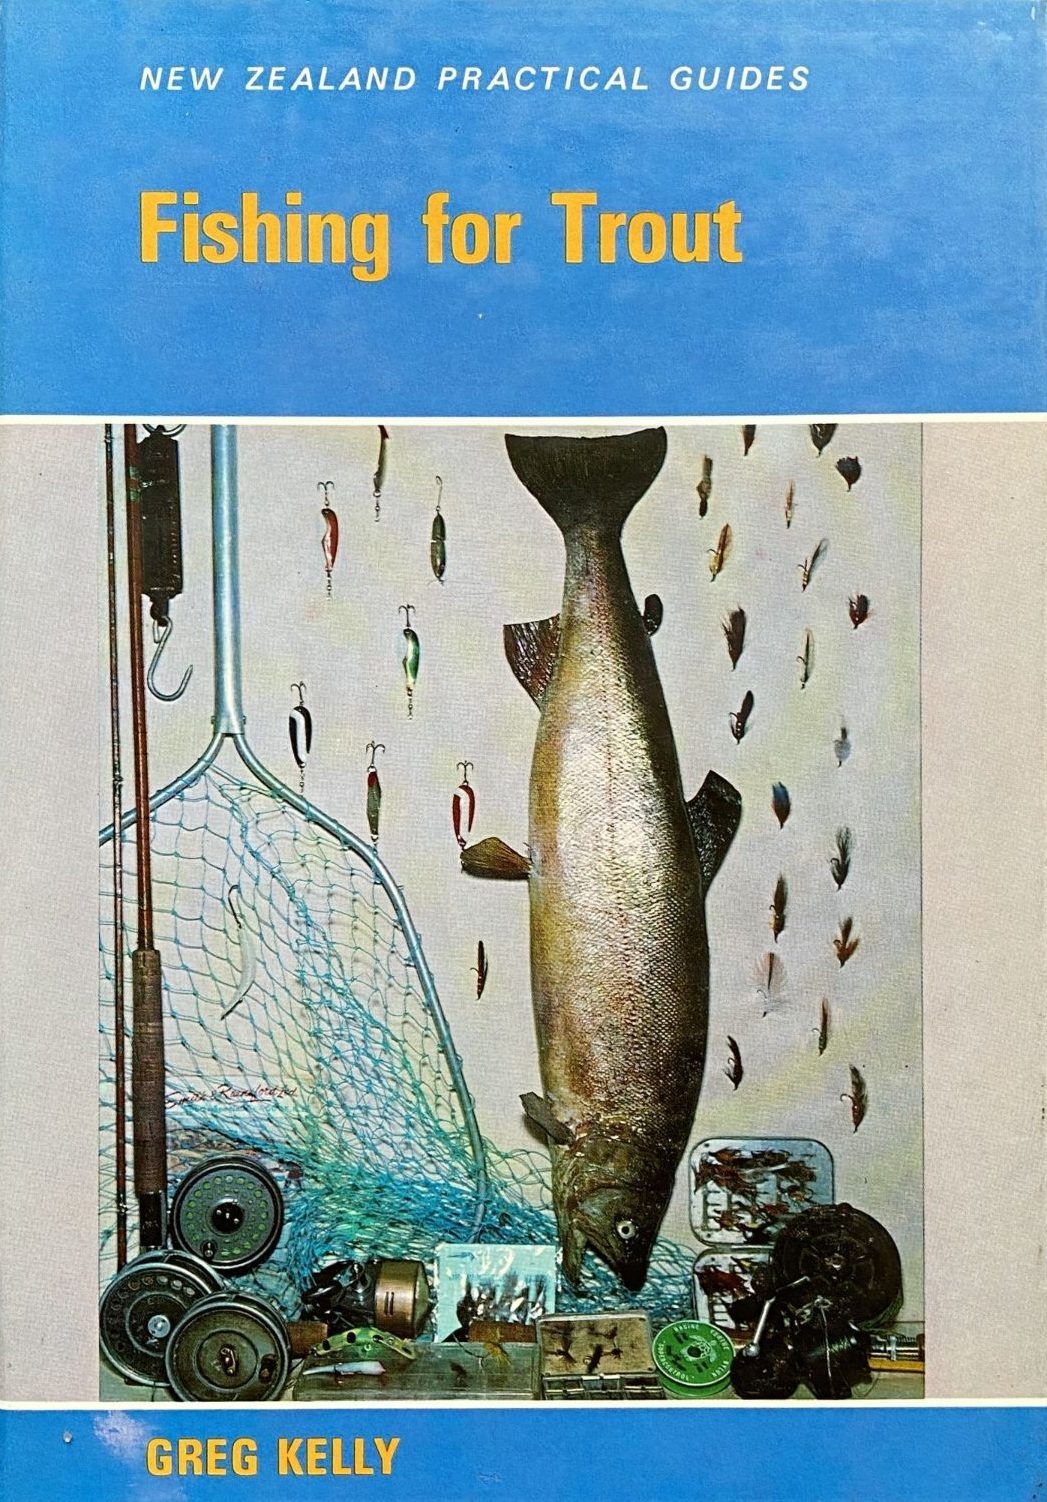 FISHING FOR TROUT